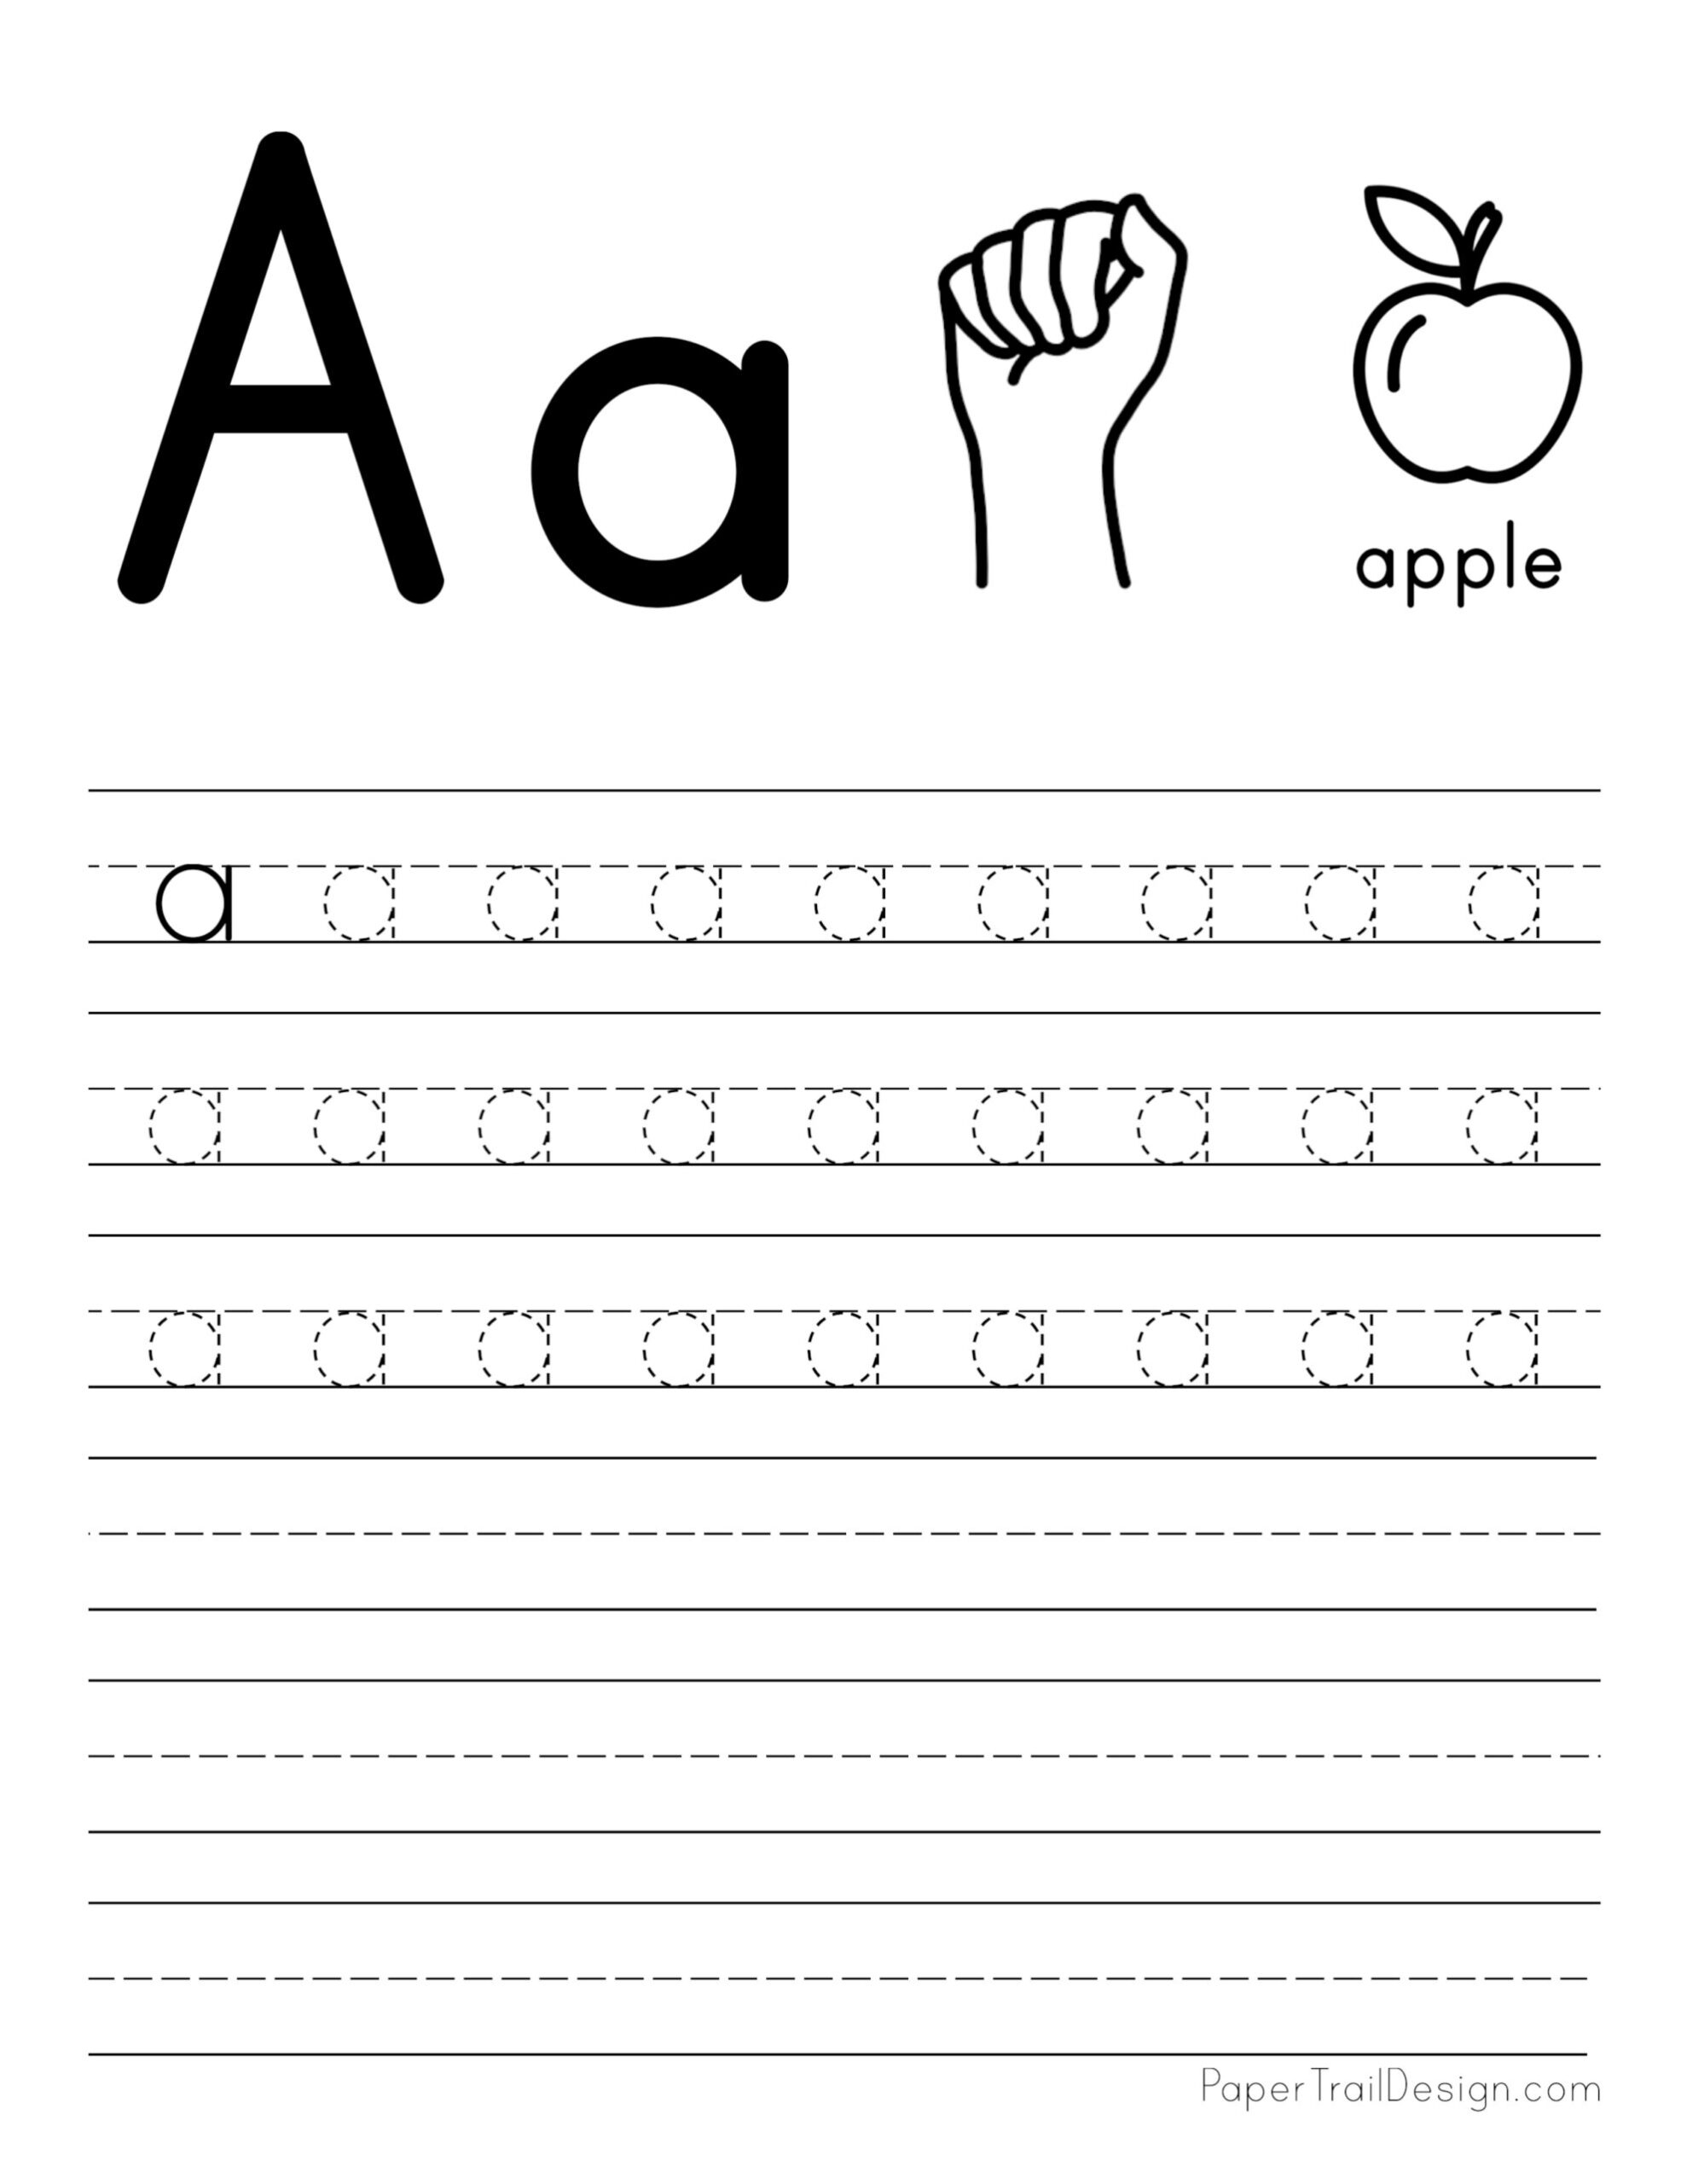 Free Letter Tracing Worksheets - Paper Trail Design for Free Printable Letter Tracing Sheets